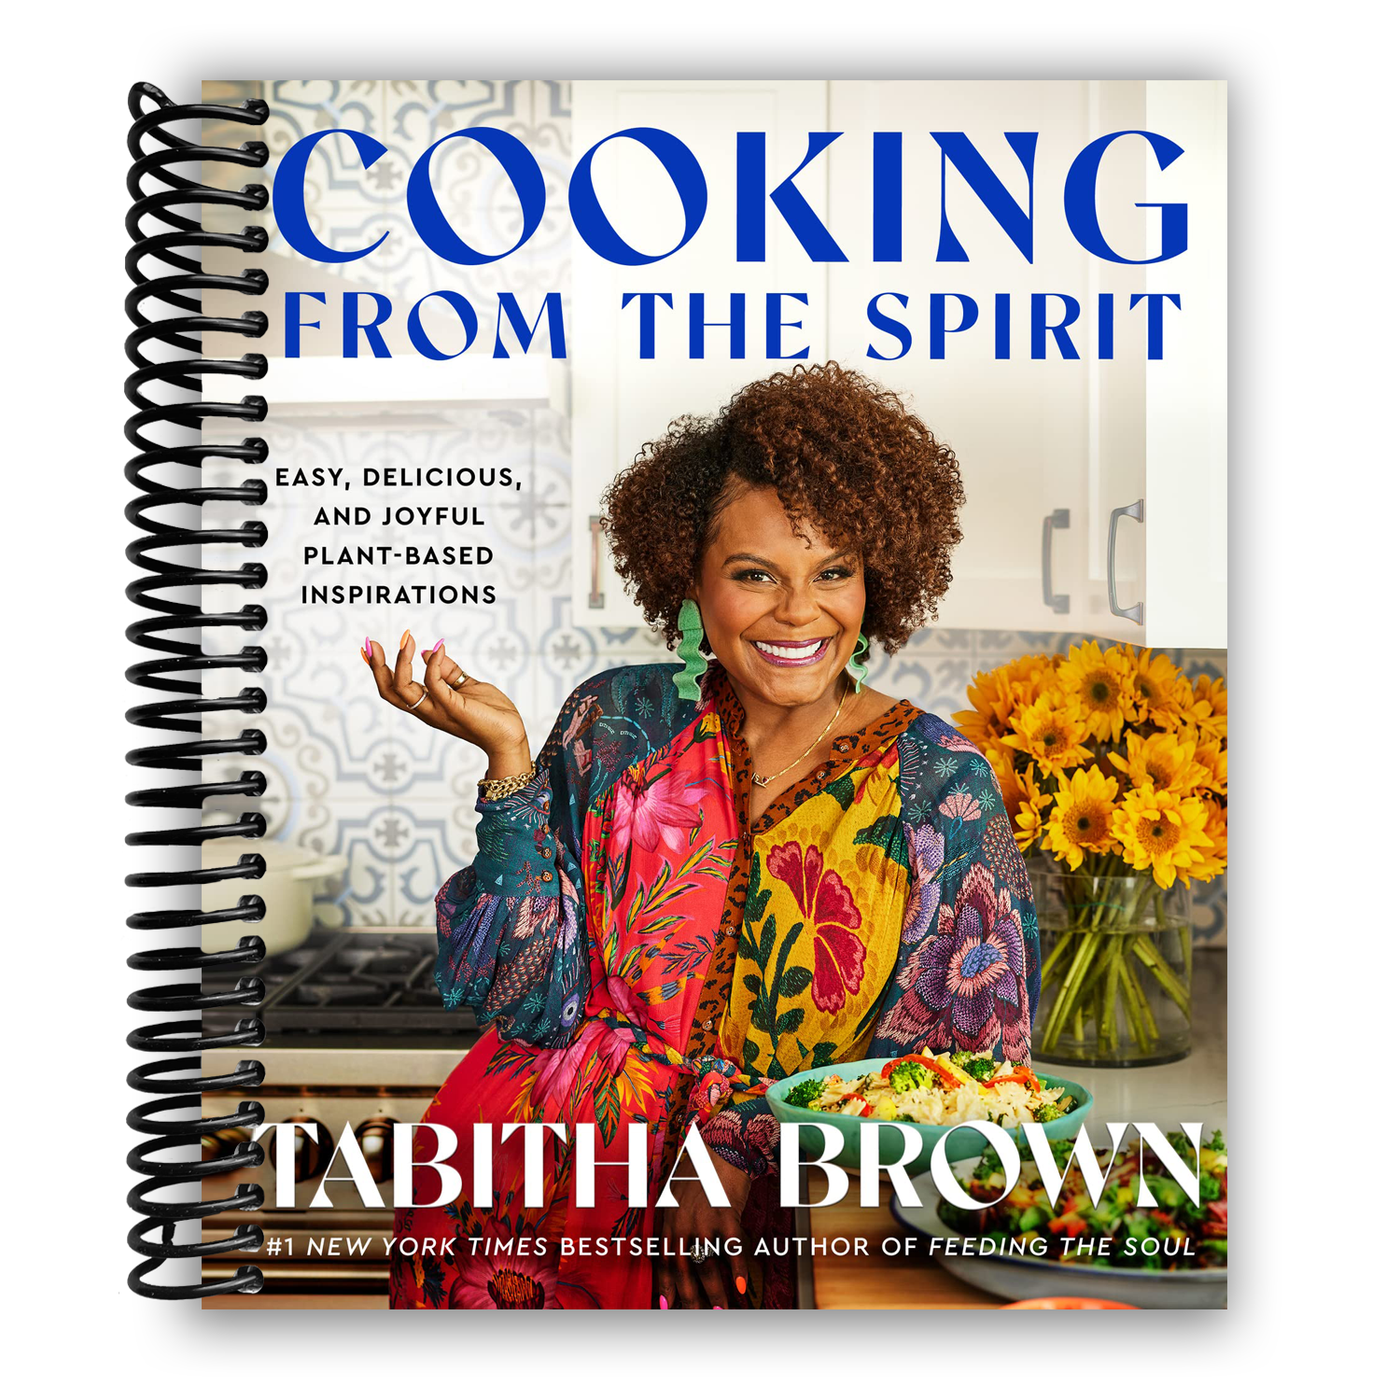 Cooking from the Spirit: Easy, Delicious, and Joyful Plant-Based Inspirations (Spiral Bound)